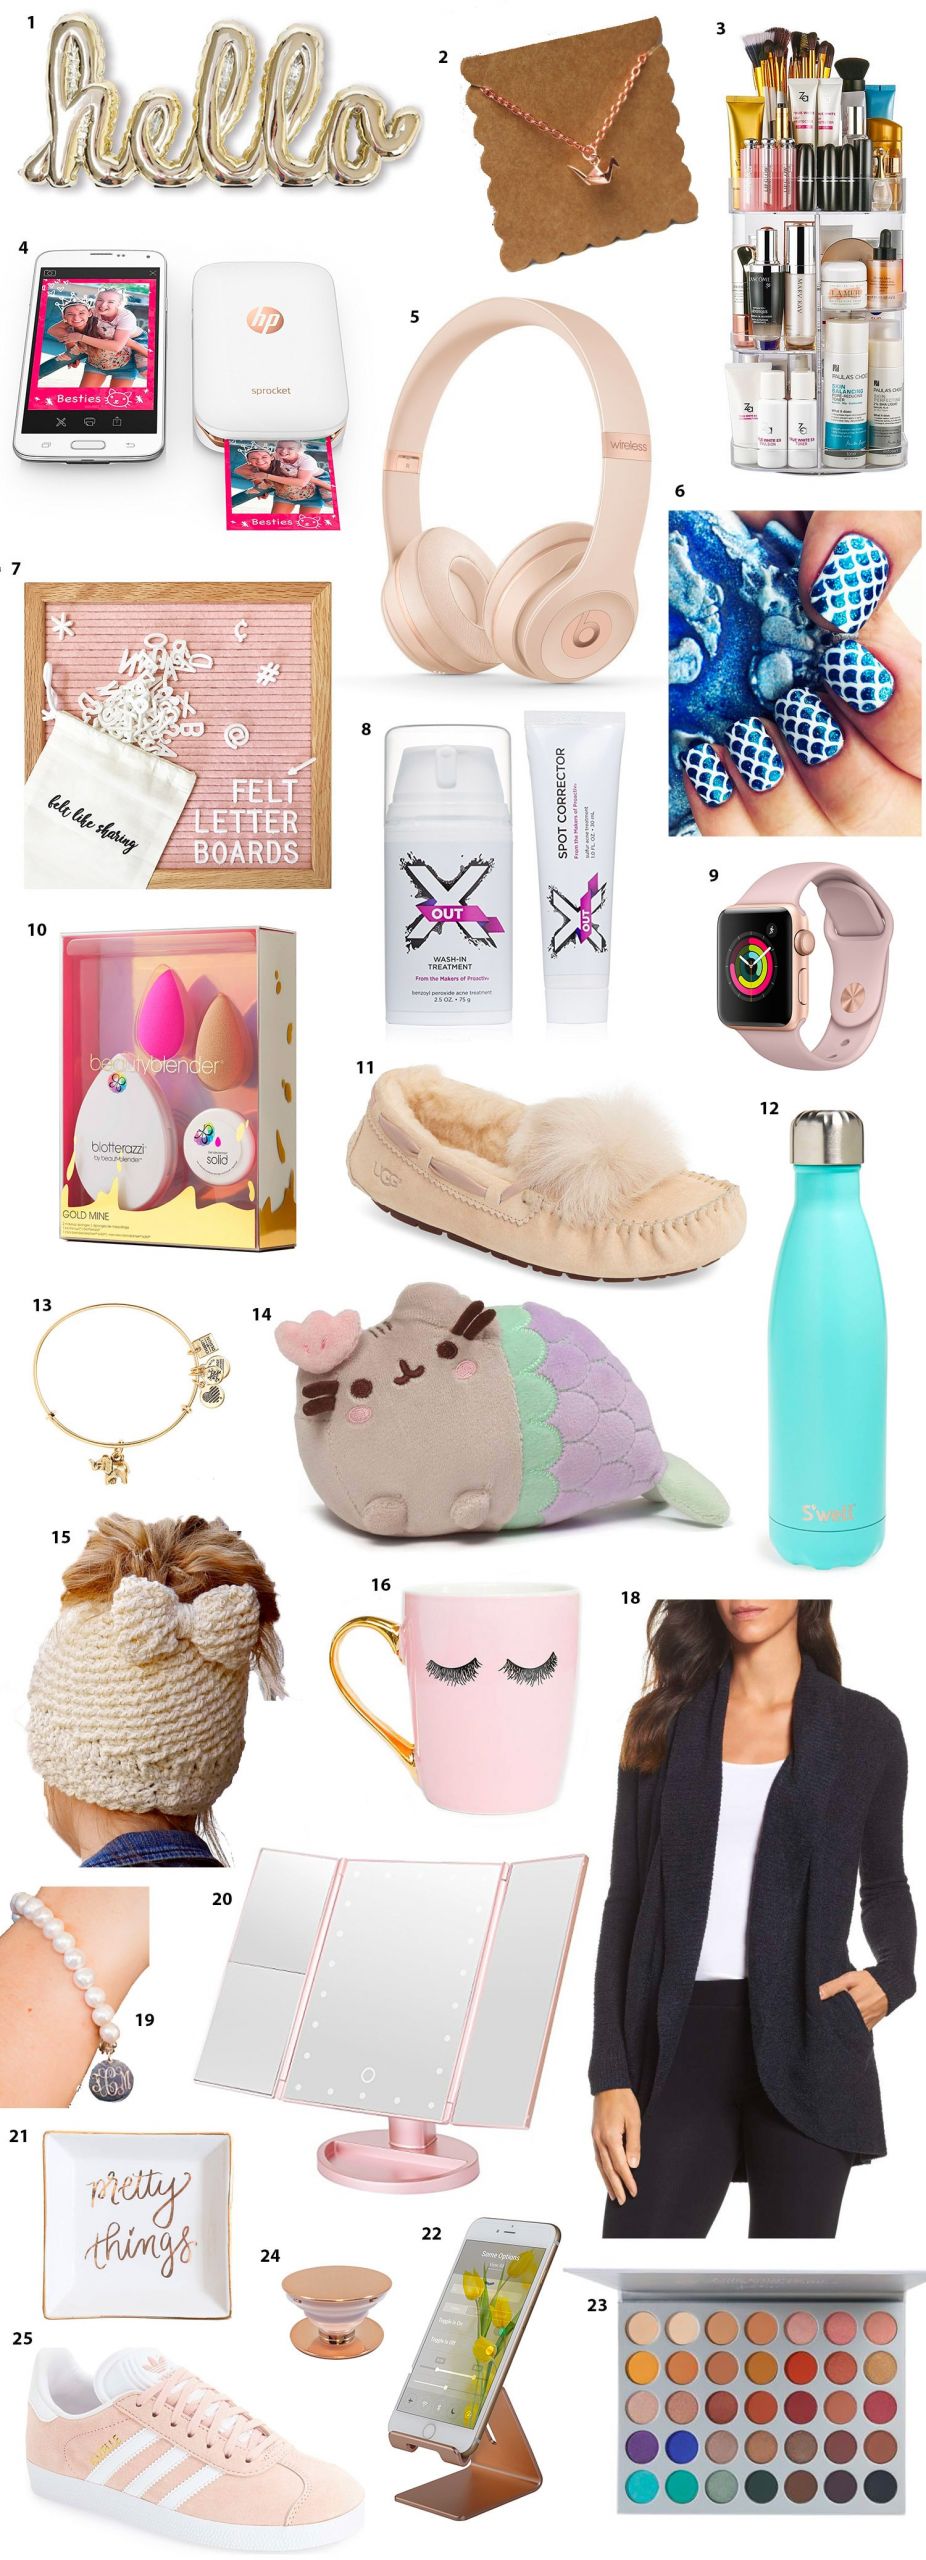 Christmas Gift Ideas For Teens
 Top Gifts for Teens This Christmas